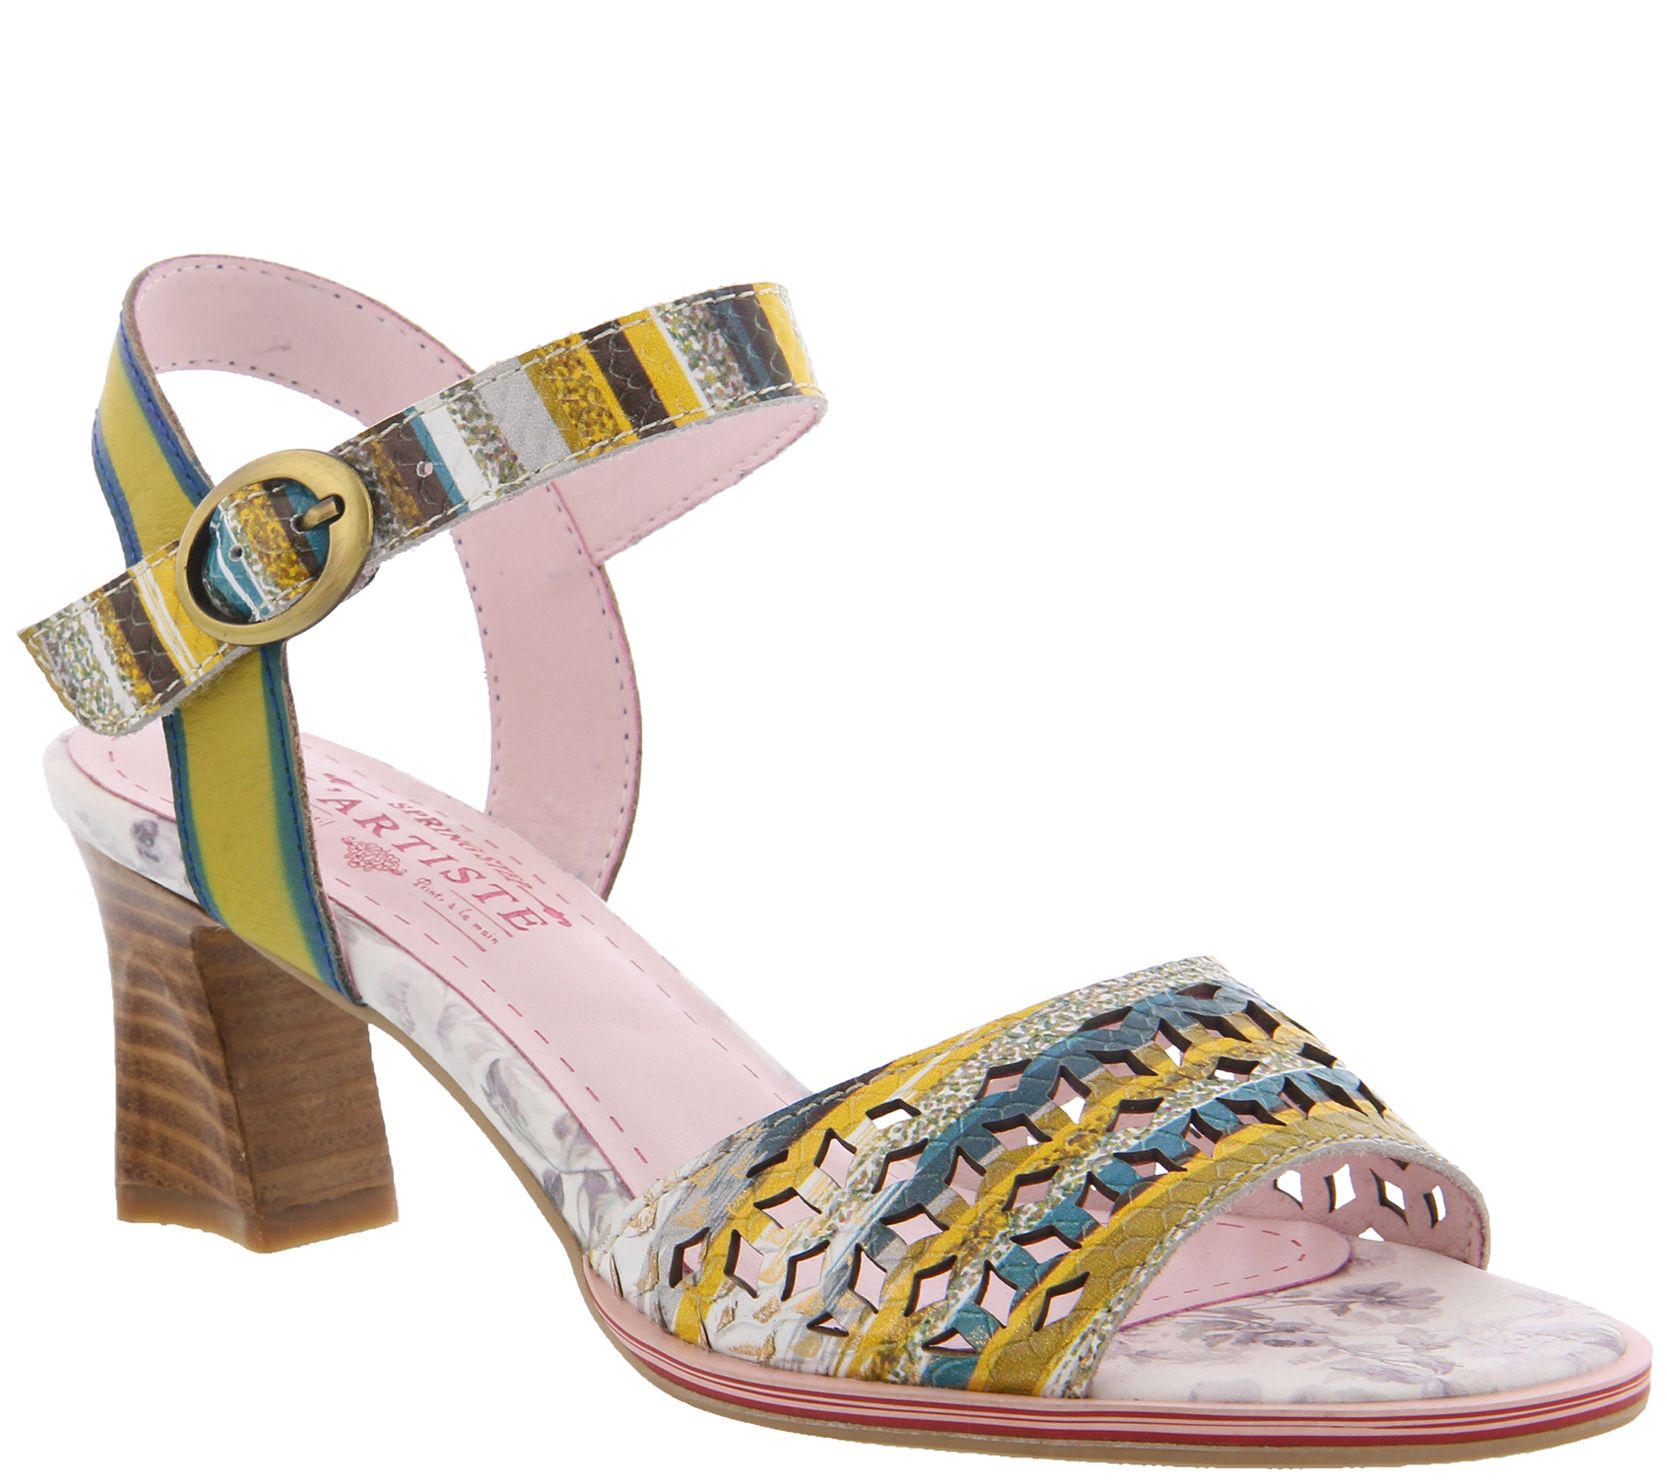 L'Artiste by Spring Step Leather Ankle Strap Sandals - Madelyn - QVC.com